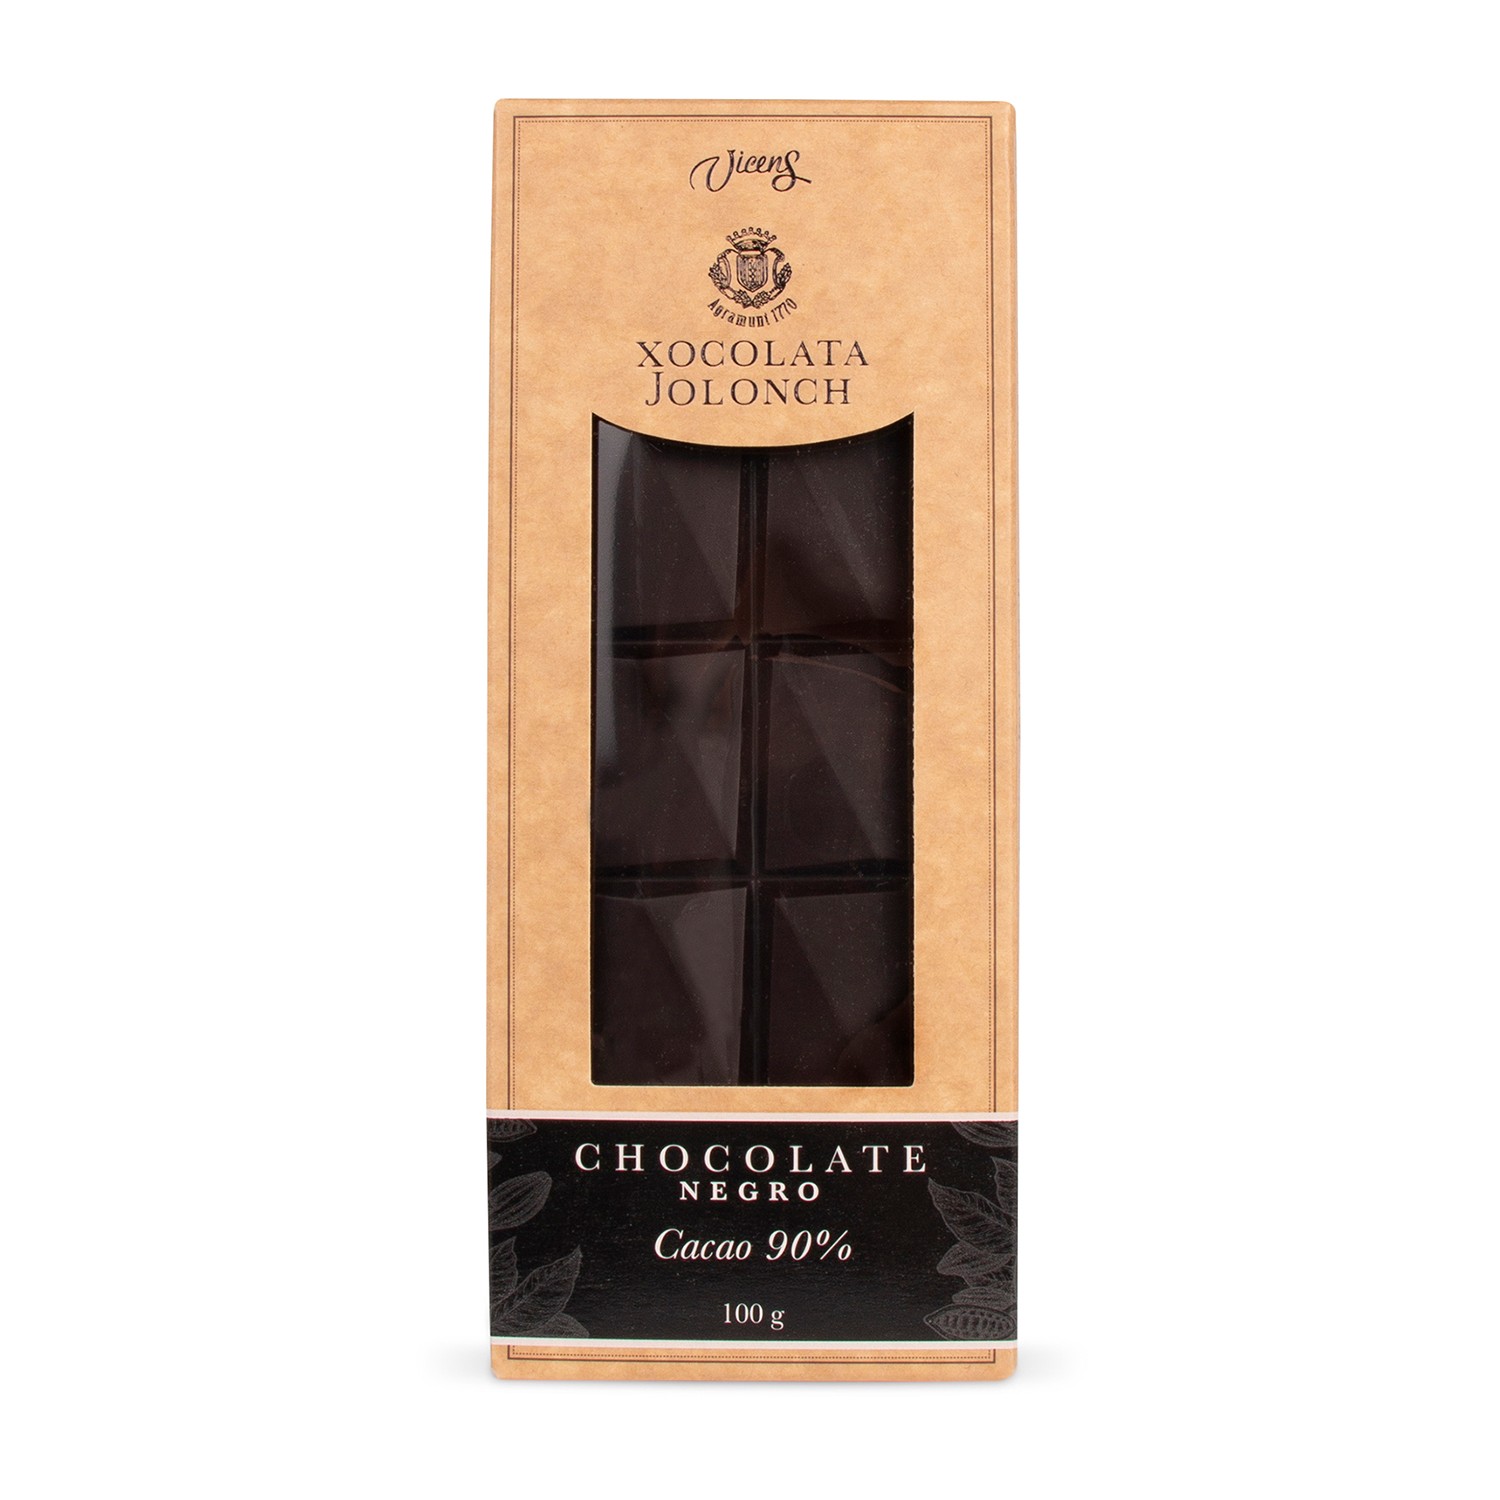 Dark Chocolate with Cocoa 90% Jolonch 100g